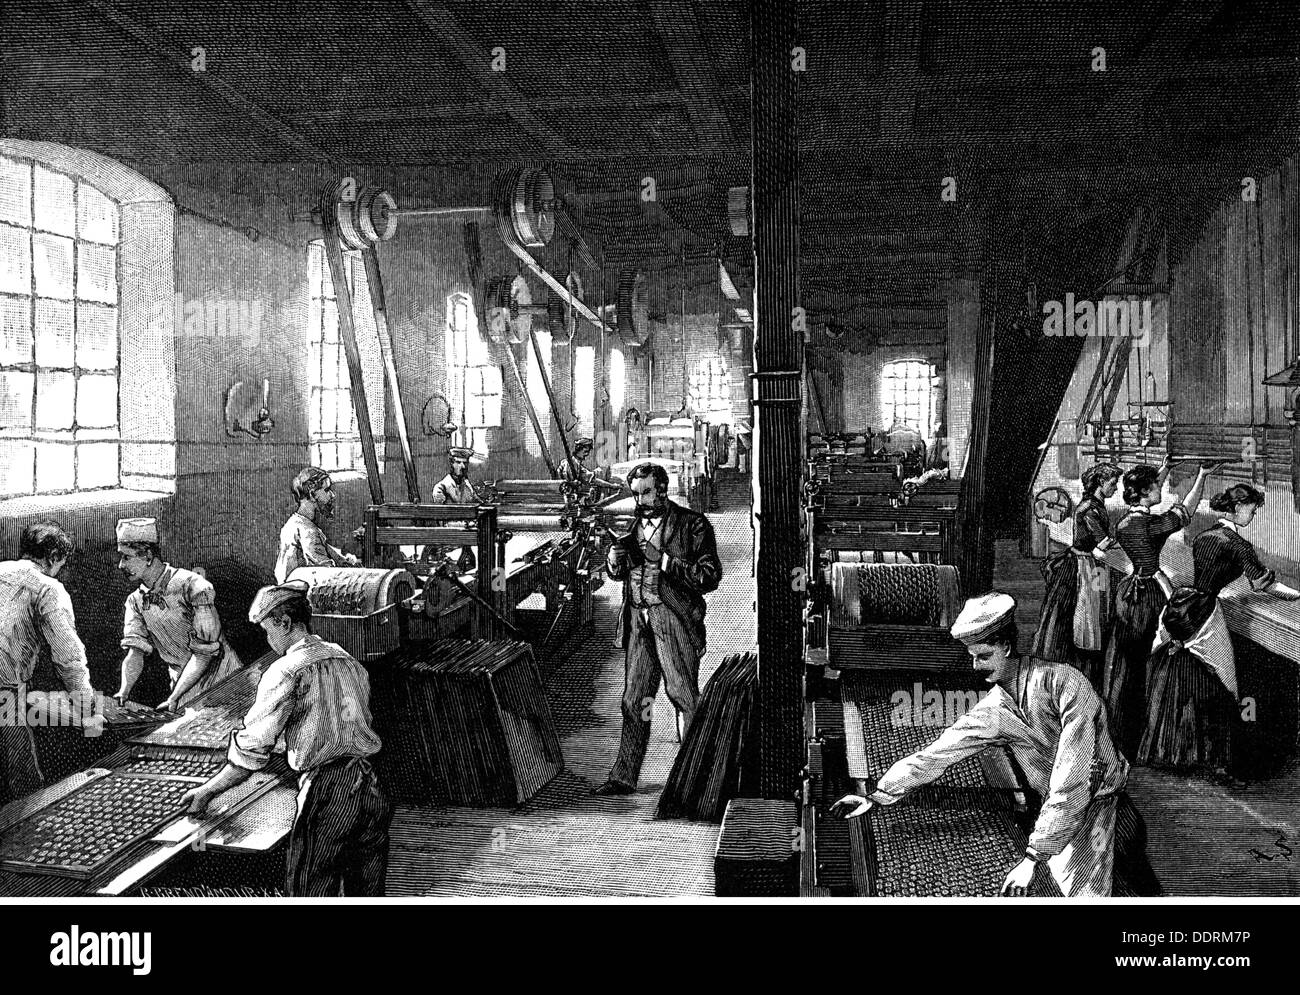 industry, food, sponge, biscuit factory of Langnese, Eppendorf, interior view, molding machines and dough rolls, wood engraving, 1884, Additional-Rights-Clearences-Not Available Stock Photo